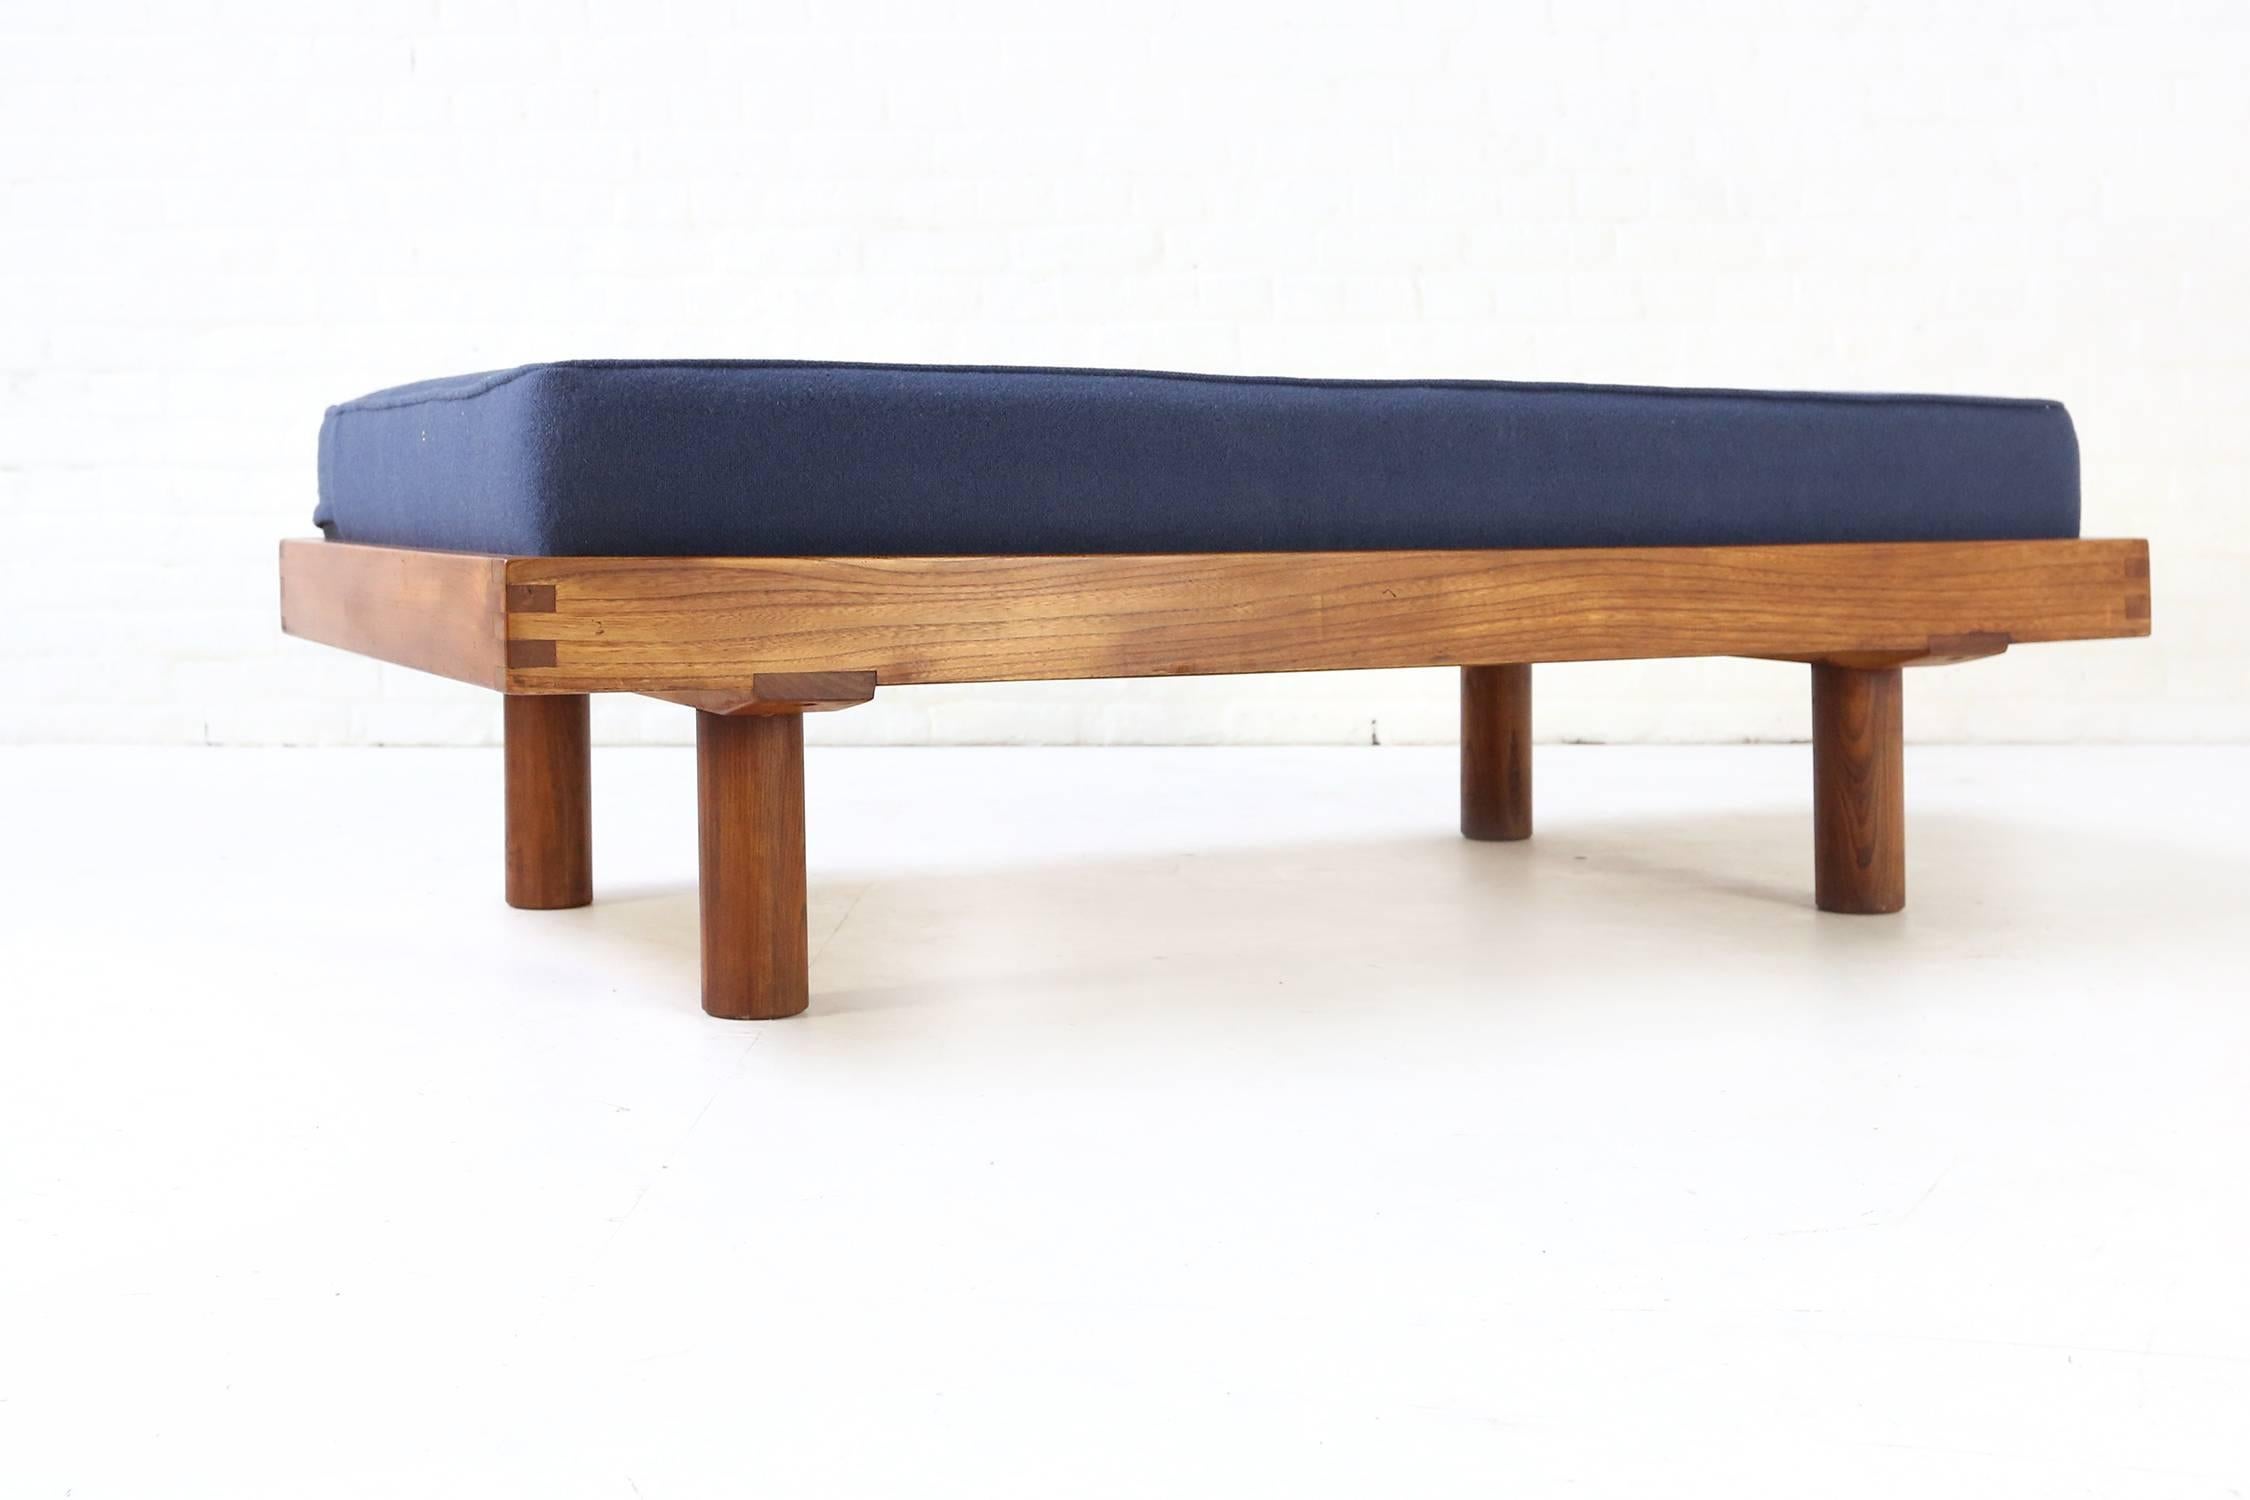 Small Pierre Chapo daybed in French elm, produced, circa 1960

Dimensions of the base: L 132cm x H 30 cm x D 76cm
Dimensions of the mattress: H 17cm x L 128cm x D 72 cm

Pierre Chapo (1927-1987) was born in a family of craftsmen. He was a